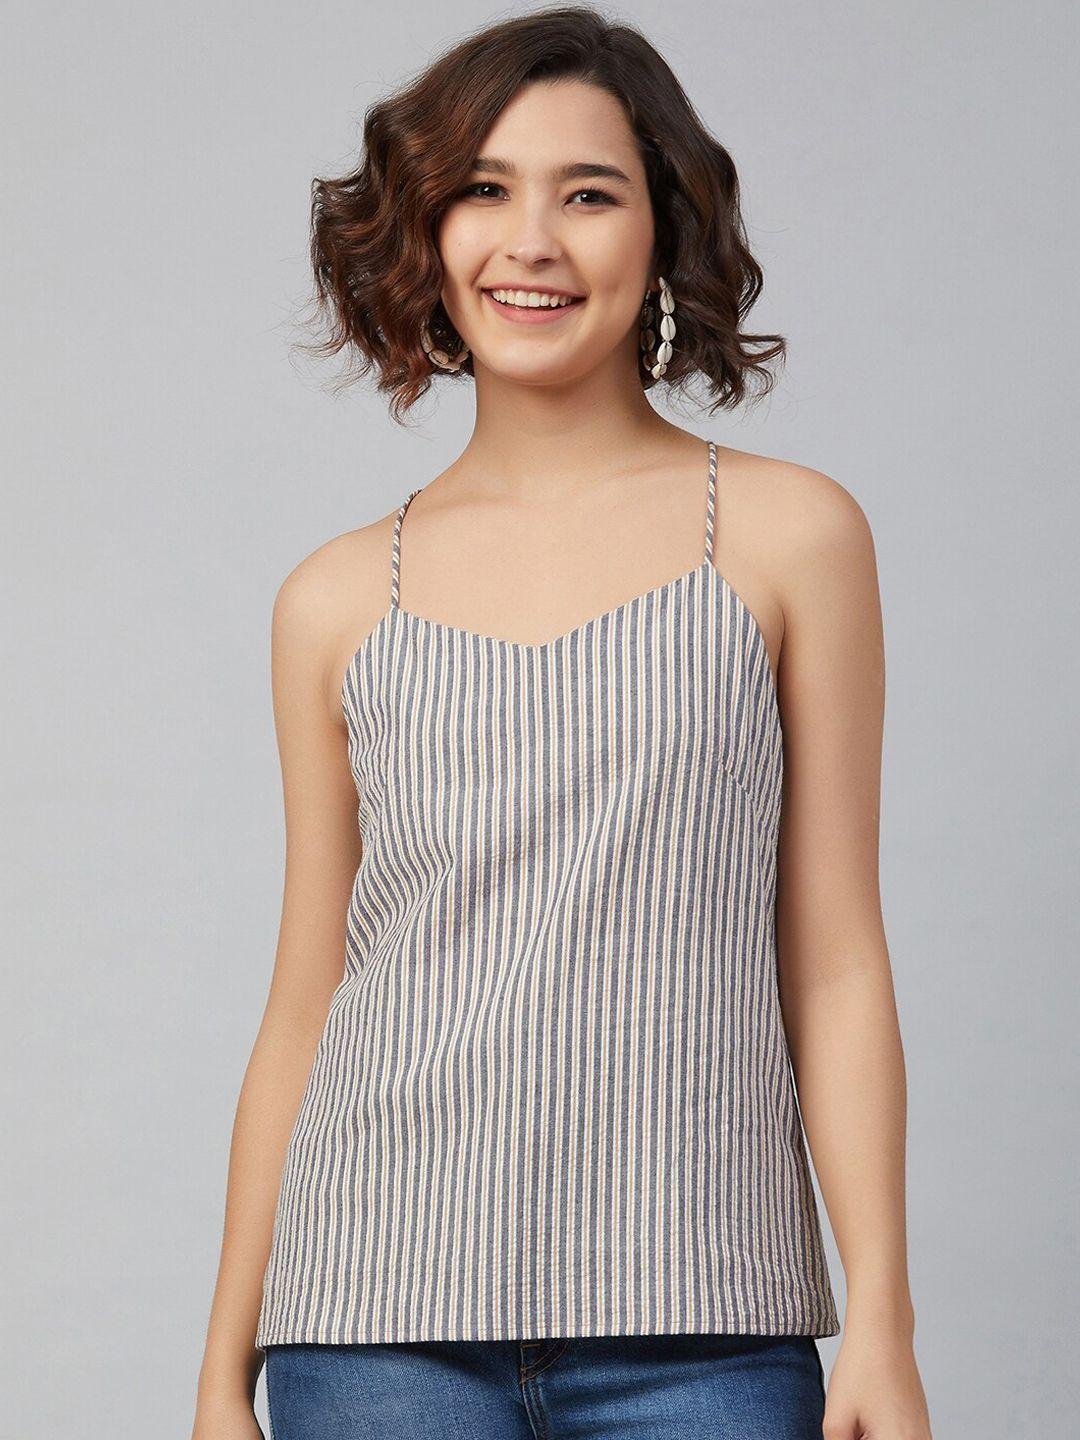 marie claire grey striped pure cotton regular top